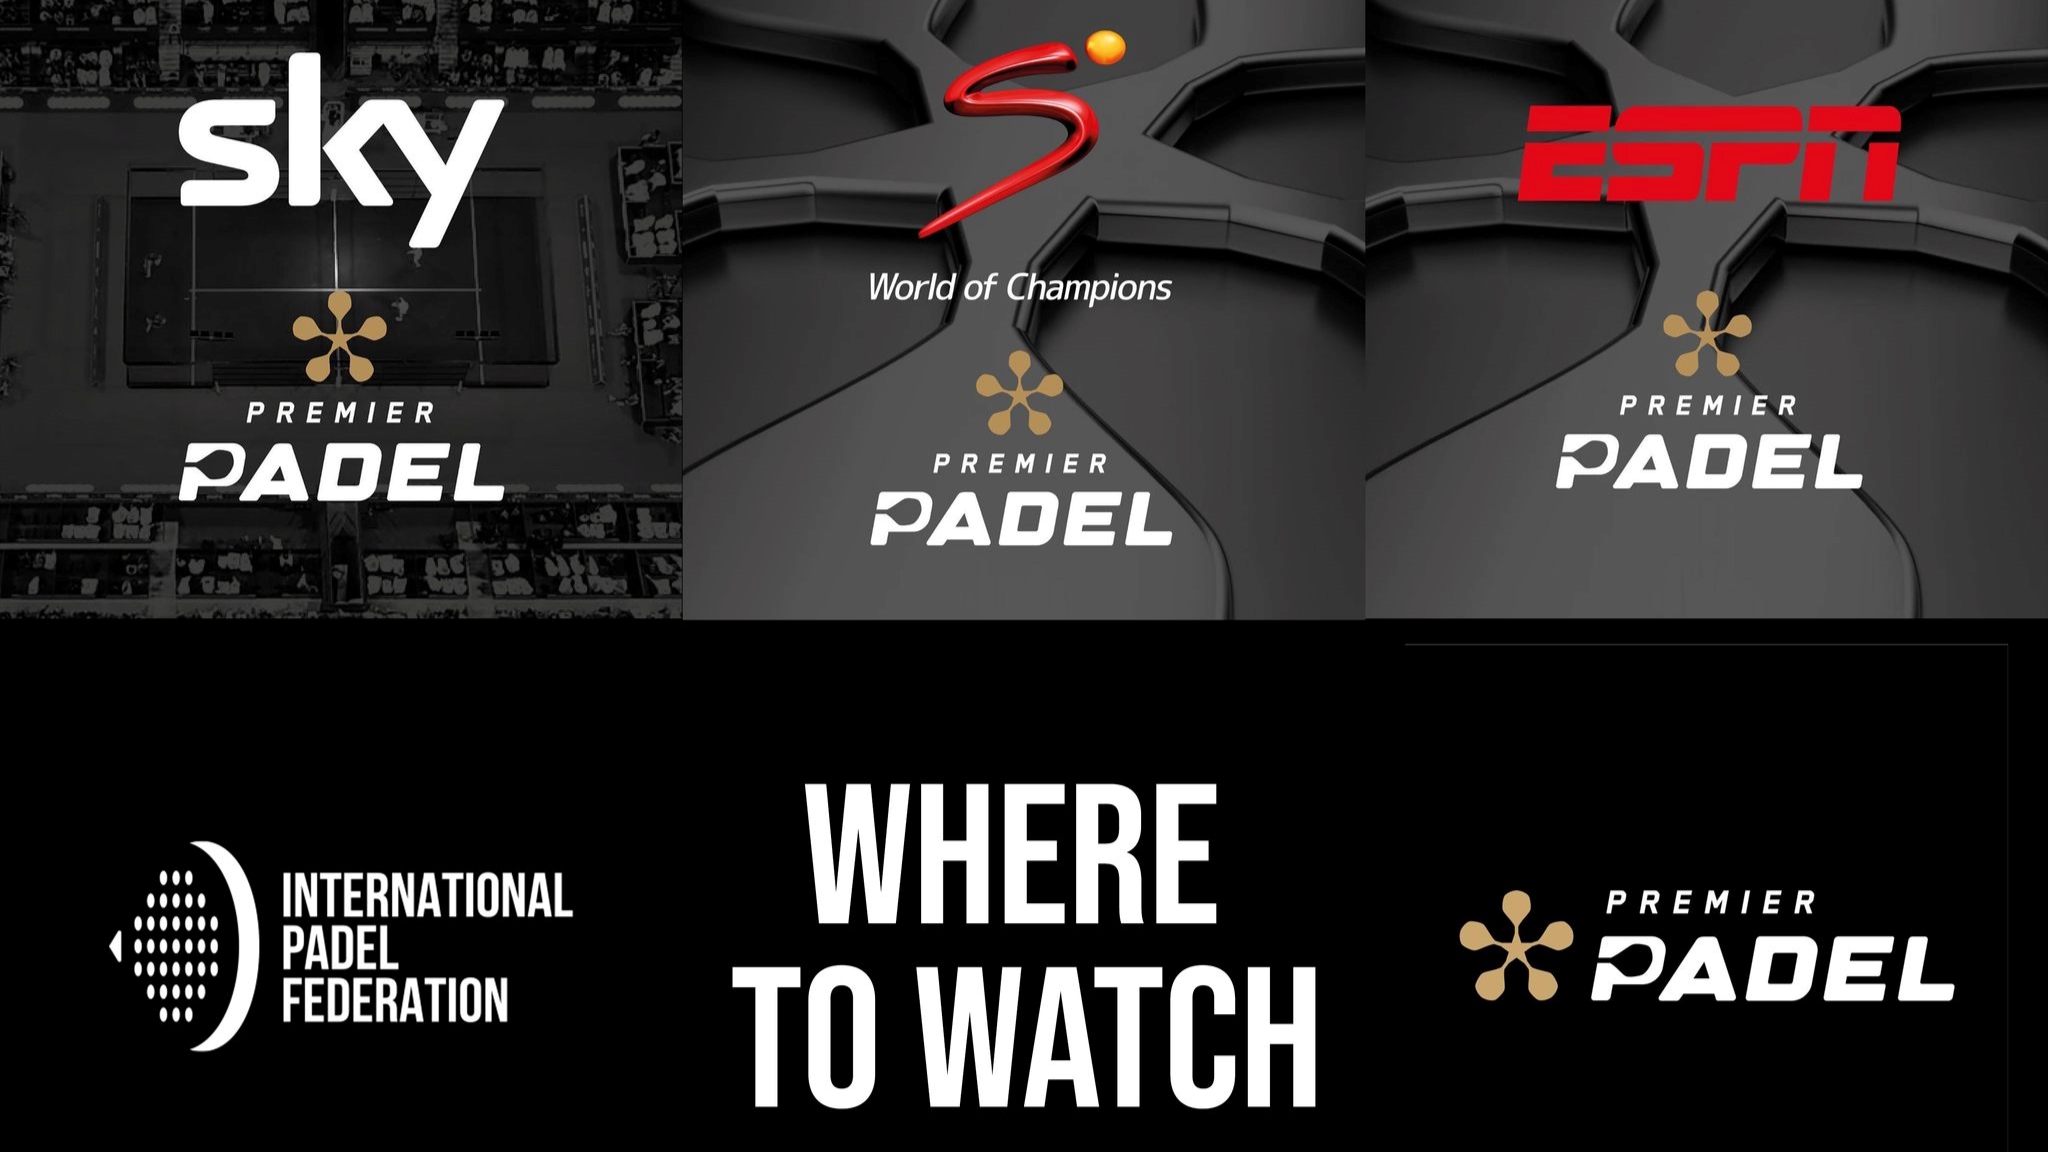 Where to look Premier padel on TV ?